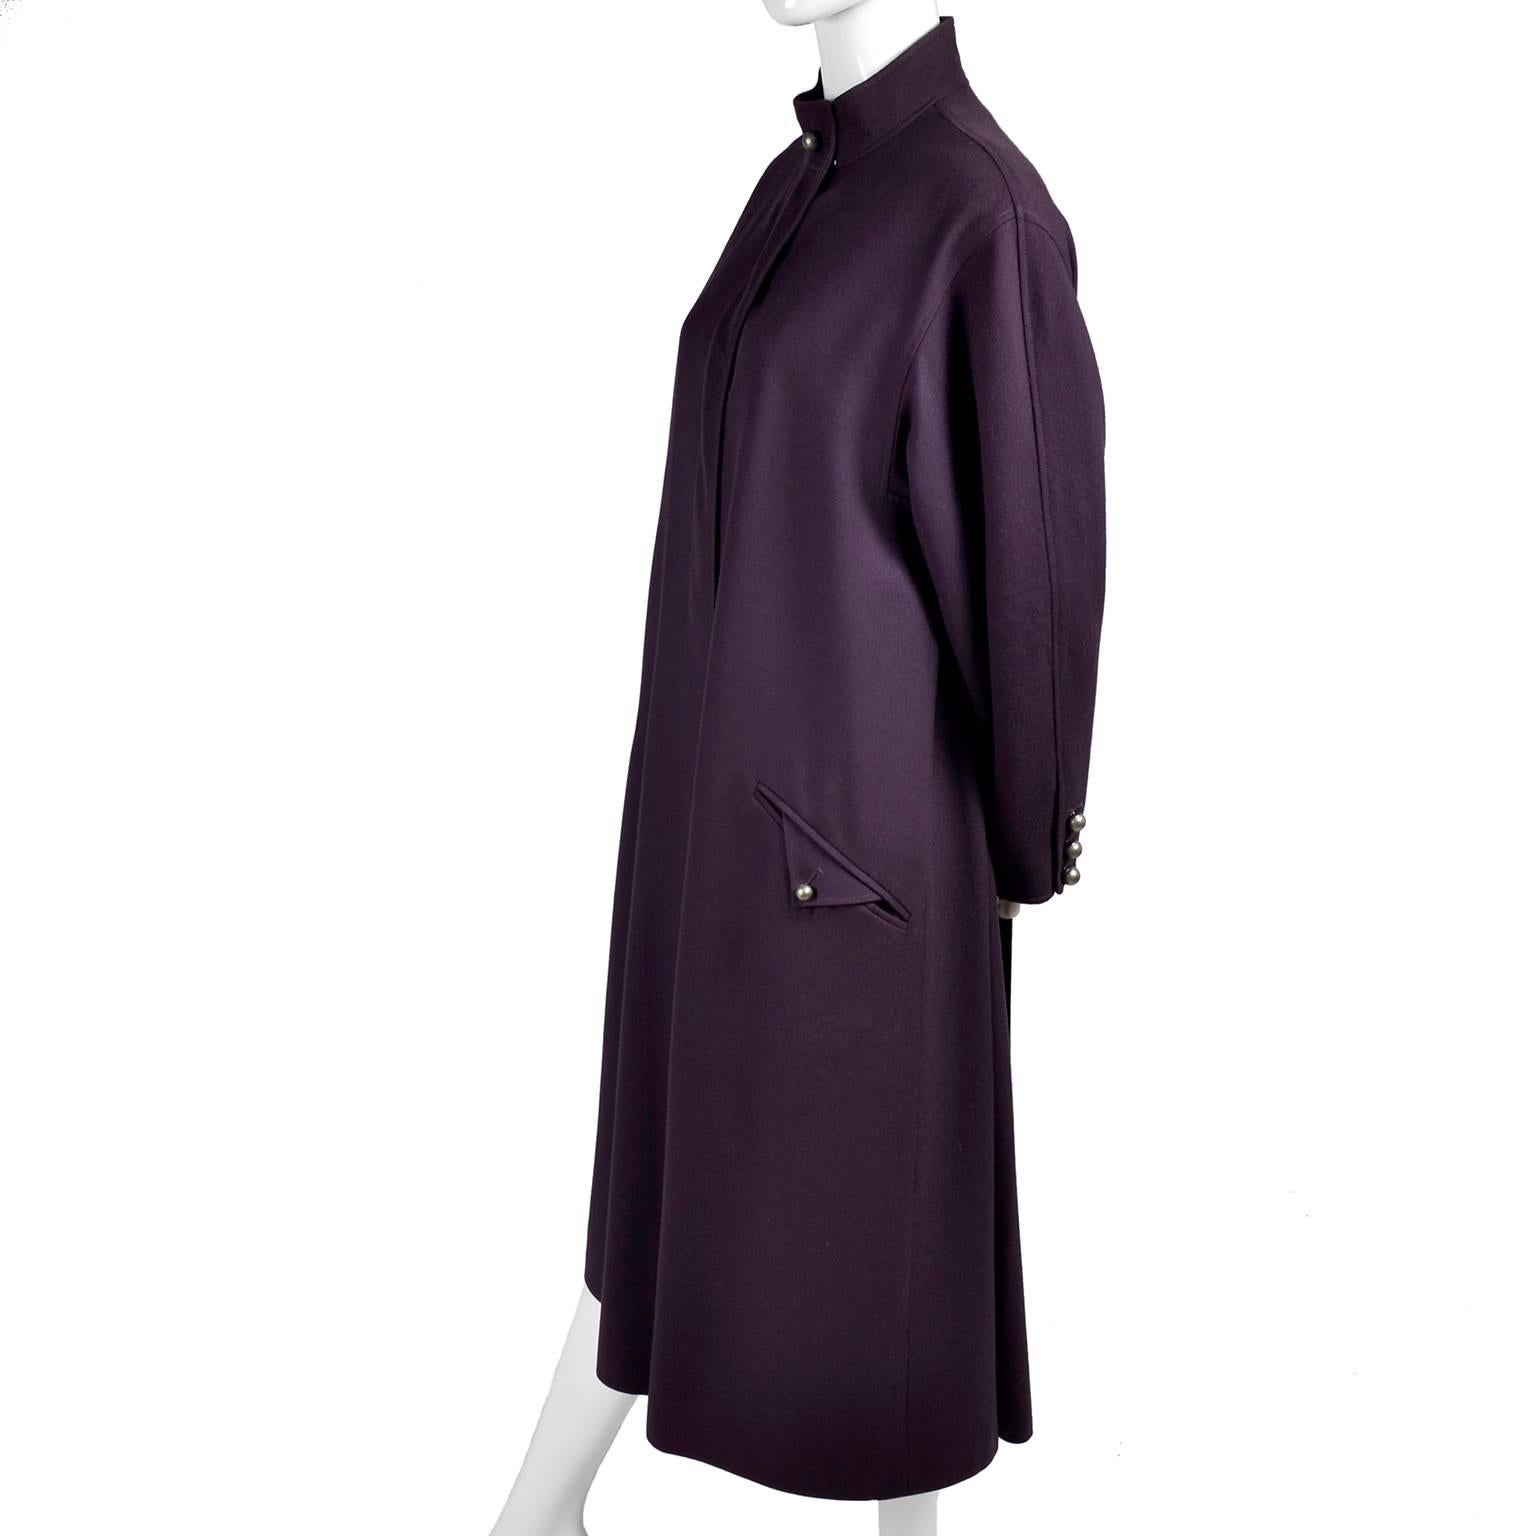 This is a beautiful purple wool vintage coat from Louis Feraud that was made in W. Germany in the 1980's.  The coat has pockets and can be worn open or with the buttons buttoned up to the high neck.  This great coat is lined with Louis Feraud